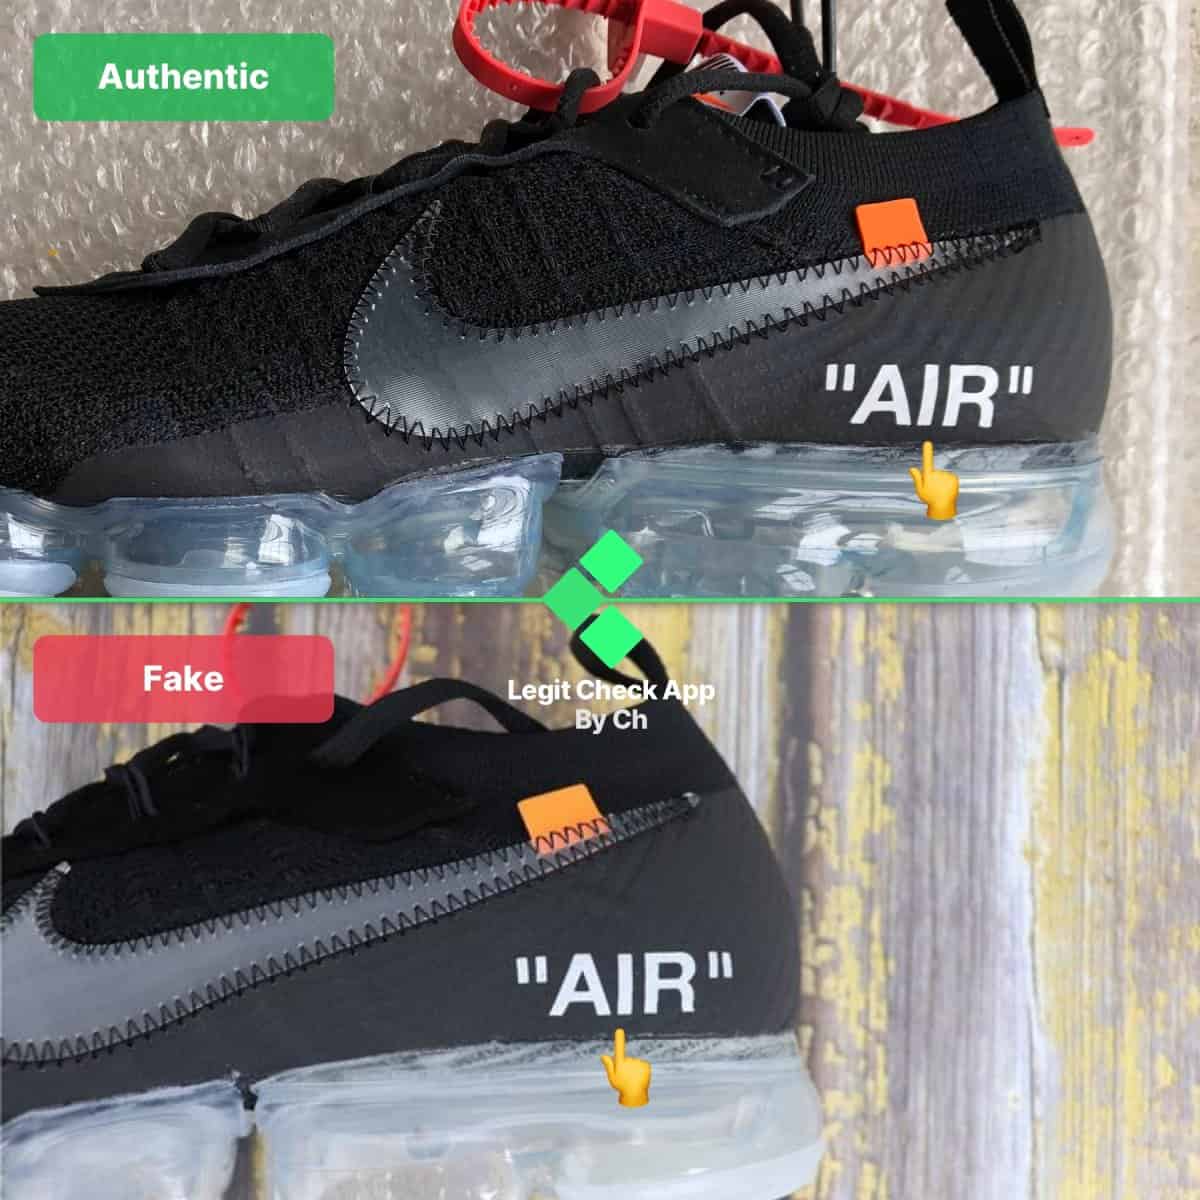 real vs fake air text off-white